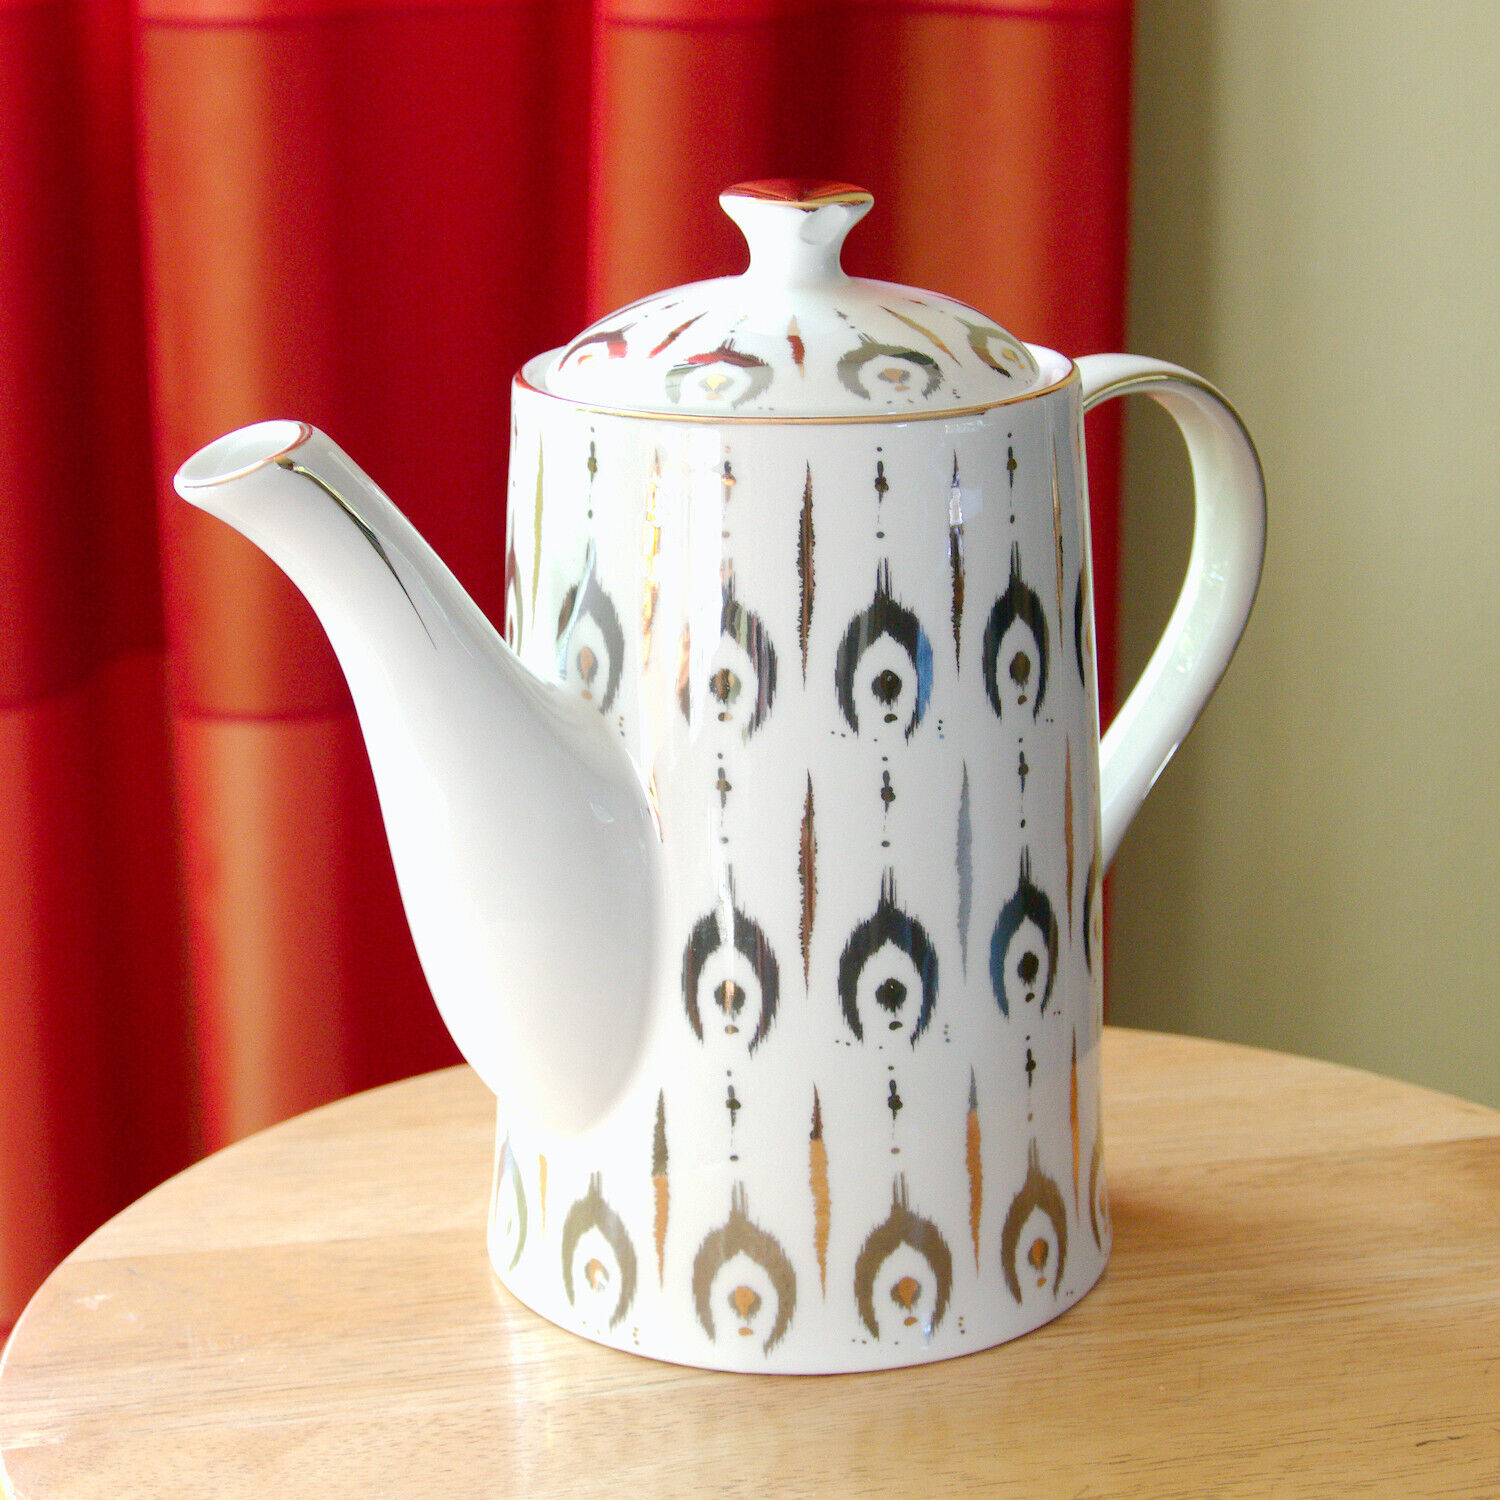 Grace's Teaware Porcelain Teapot Silver Ikat Patterned Gold Trim (8-Inches Tall)